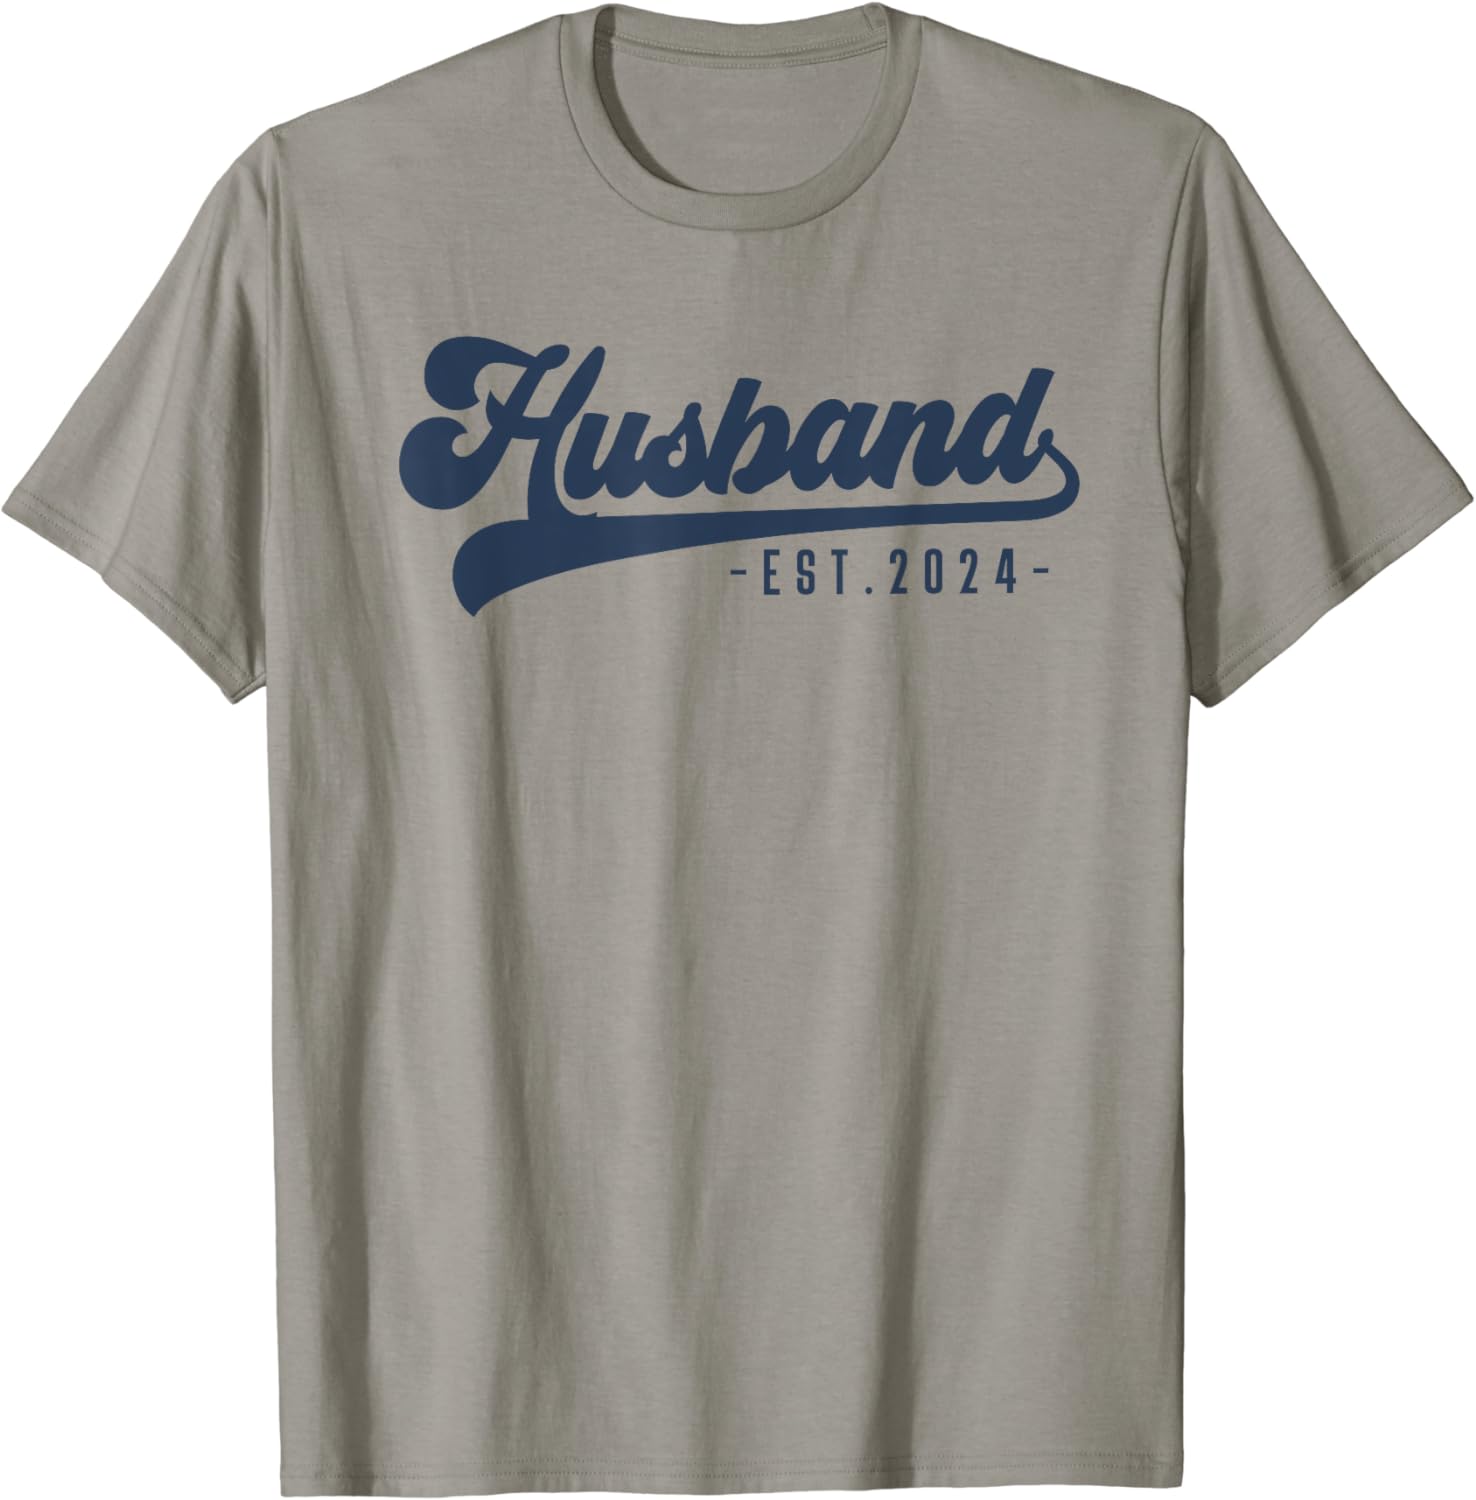 A grey t-shirt with blue text Description automatically generated